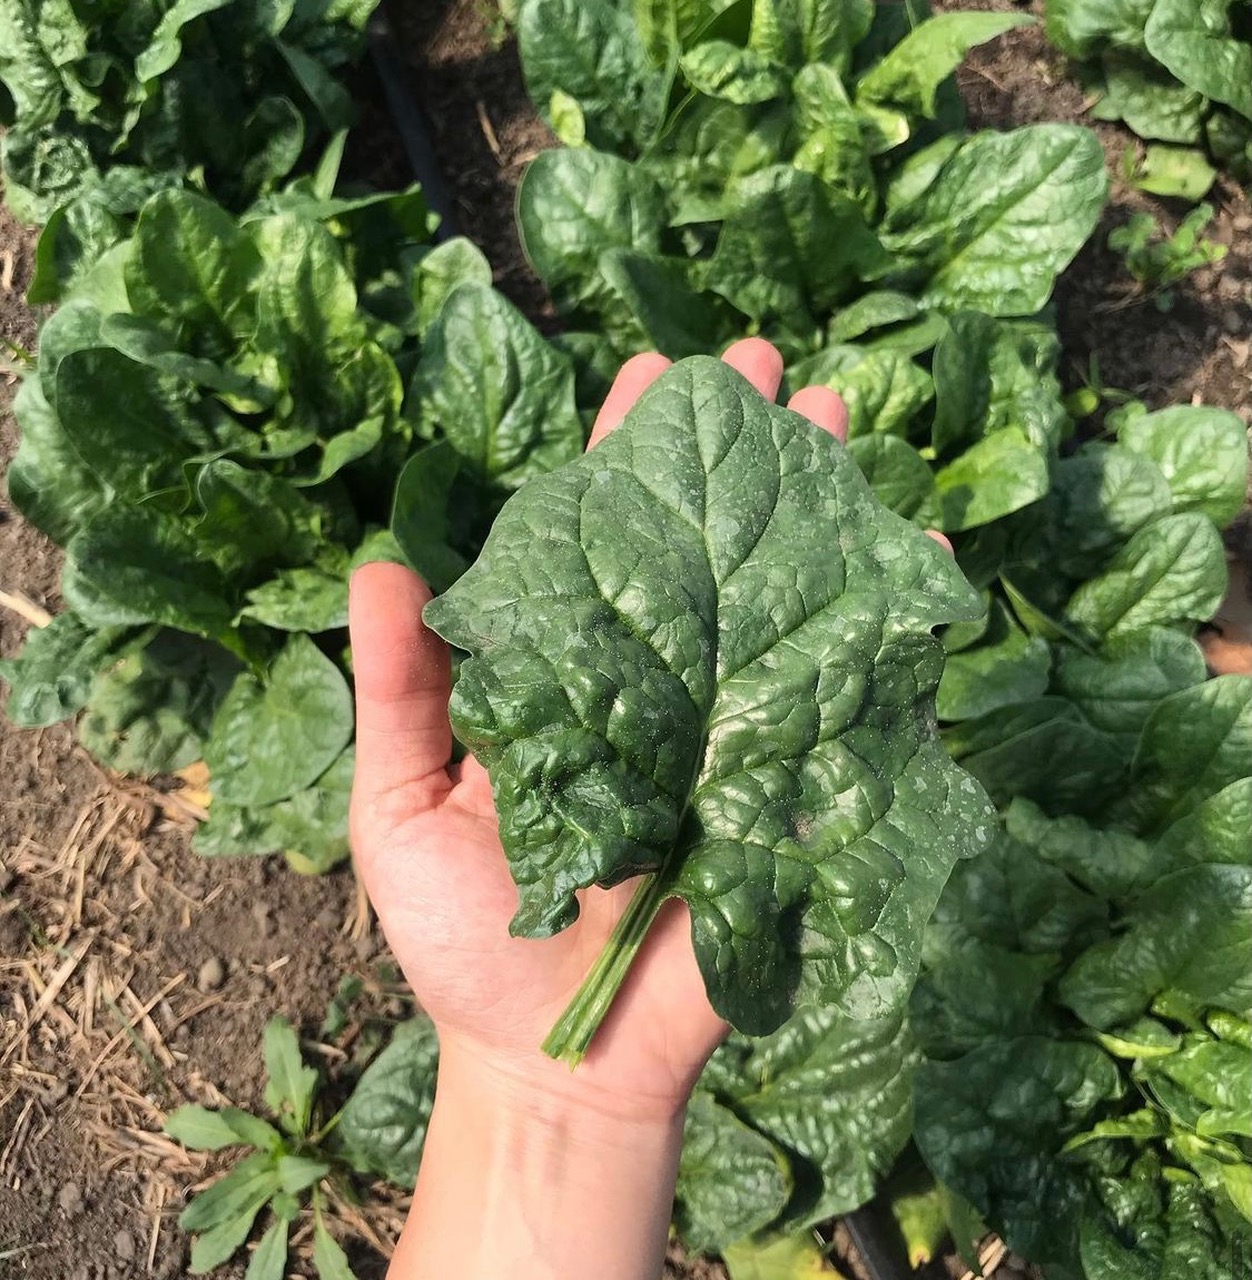 A white hand open and outstretched holds a leaf of spinach above spinach plants. Photo from Humbleweed Farm's Instagram page.